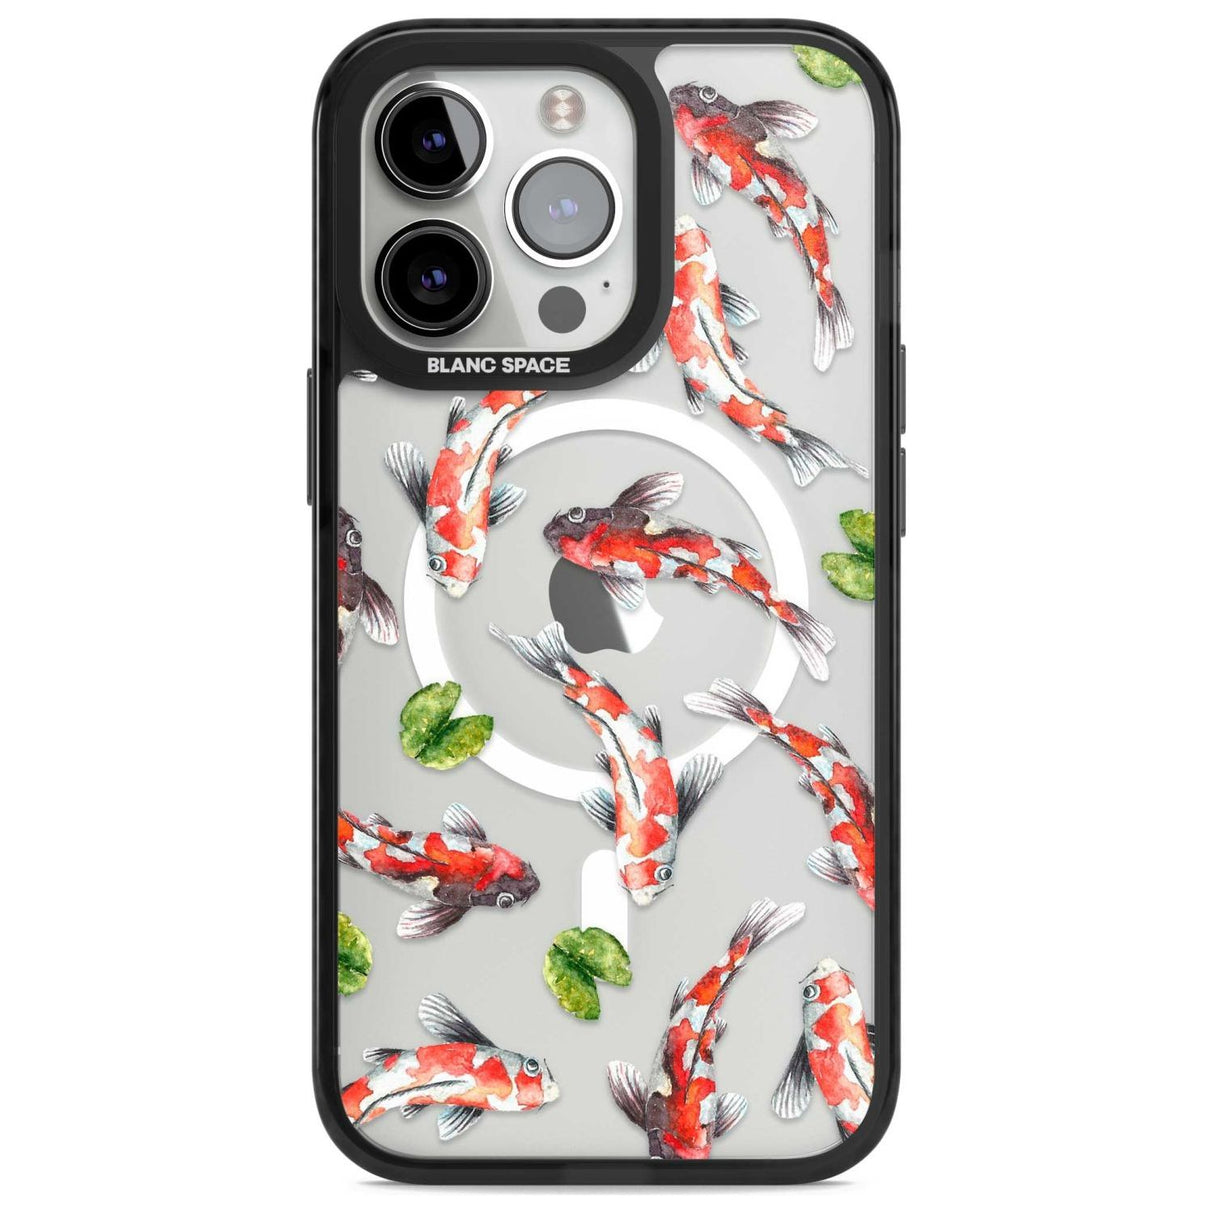 Koi Fish Japanese Watercolour Phone Case iPhone 15 Pro Max / Magsafe Black Impact Case,iPhone 15 Pro / Magsafe Black Impact Case,iPhone 14 Pro Max / Magsafe Black Impact Case,iPhone 14 Pro / Magsafe Black Impact Case,iPhone 13 Pro / Magsafe Black Impact Case Blanc Space